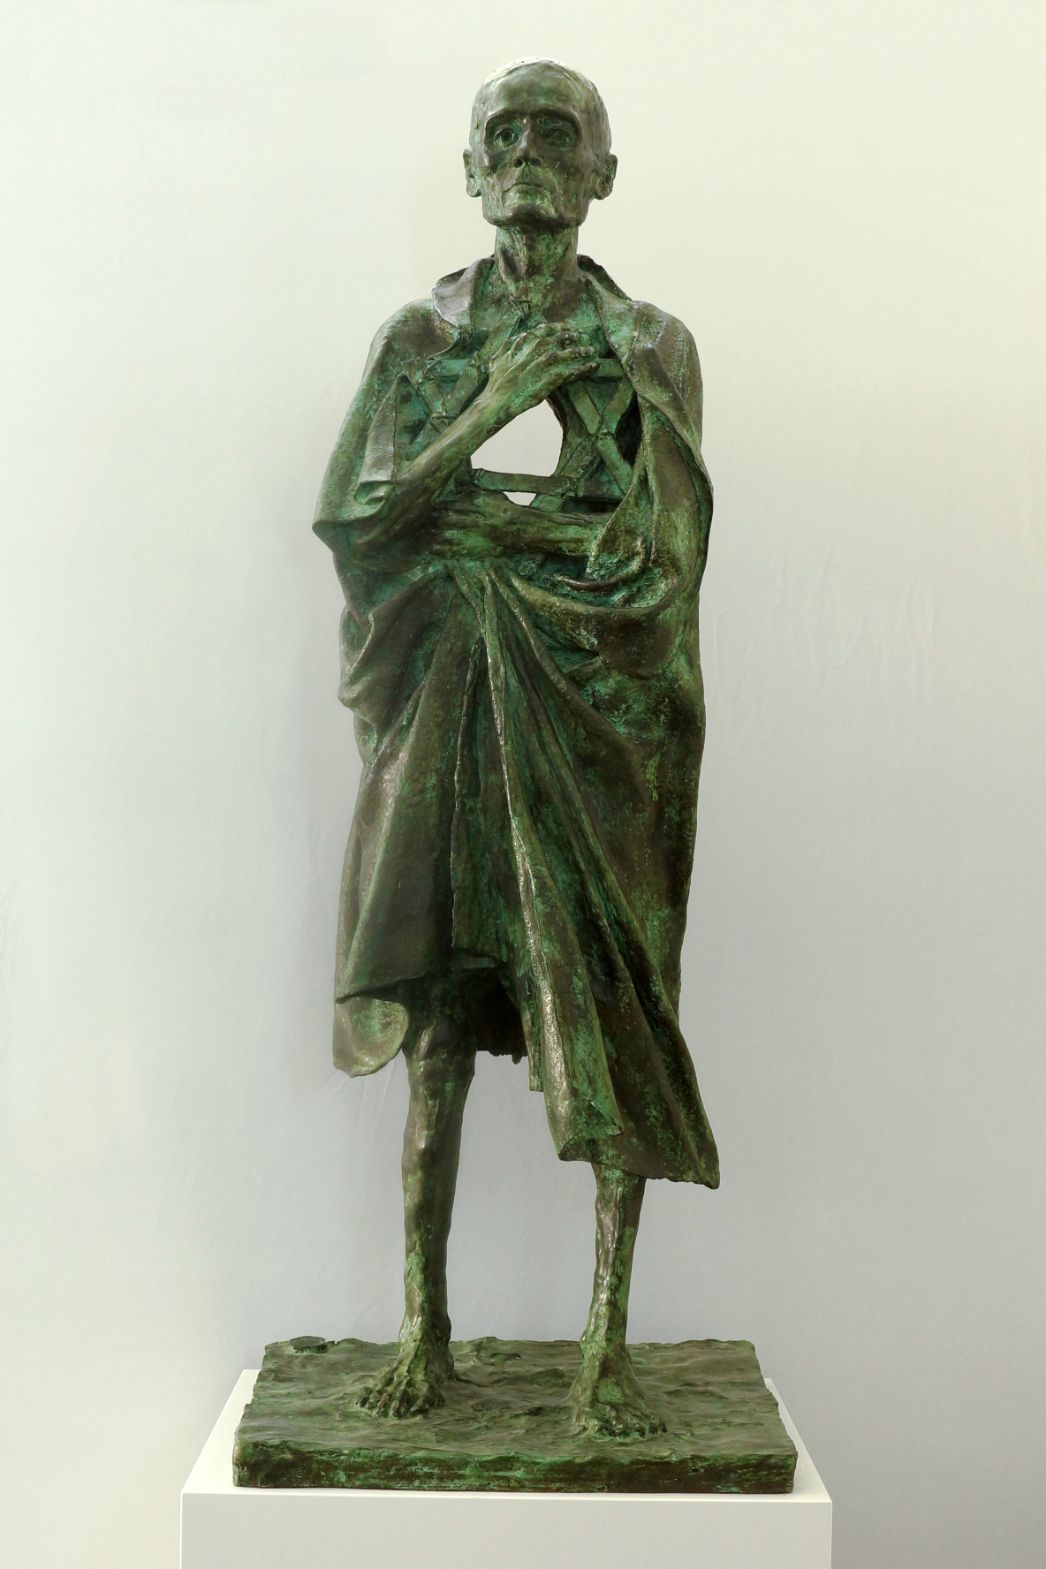 A bronze culture of an emaciated prisoner with a tattered blanket draped around him. His chest is hollow.